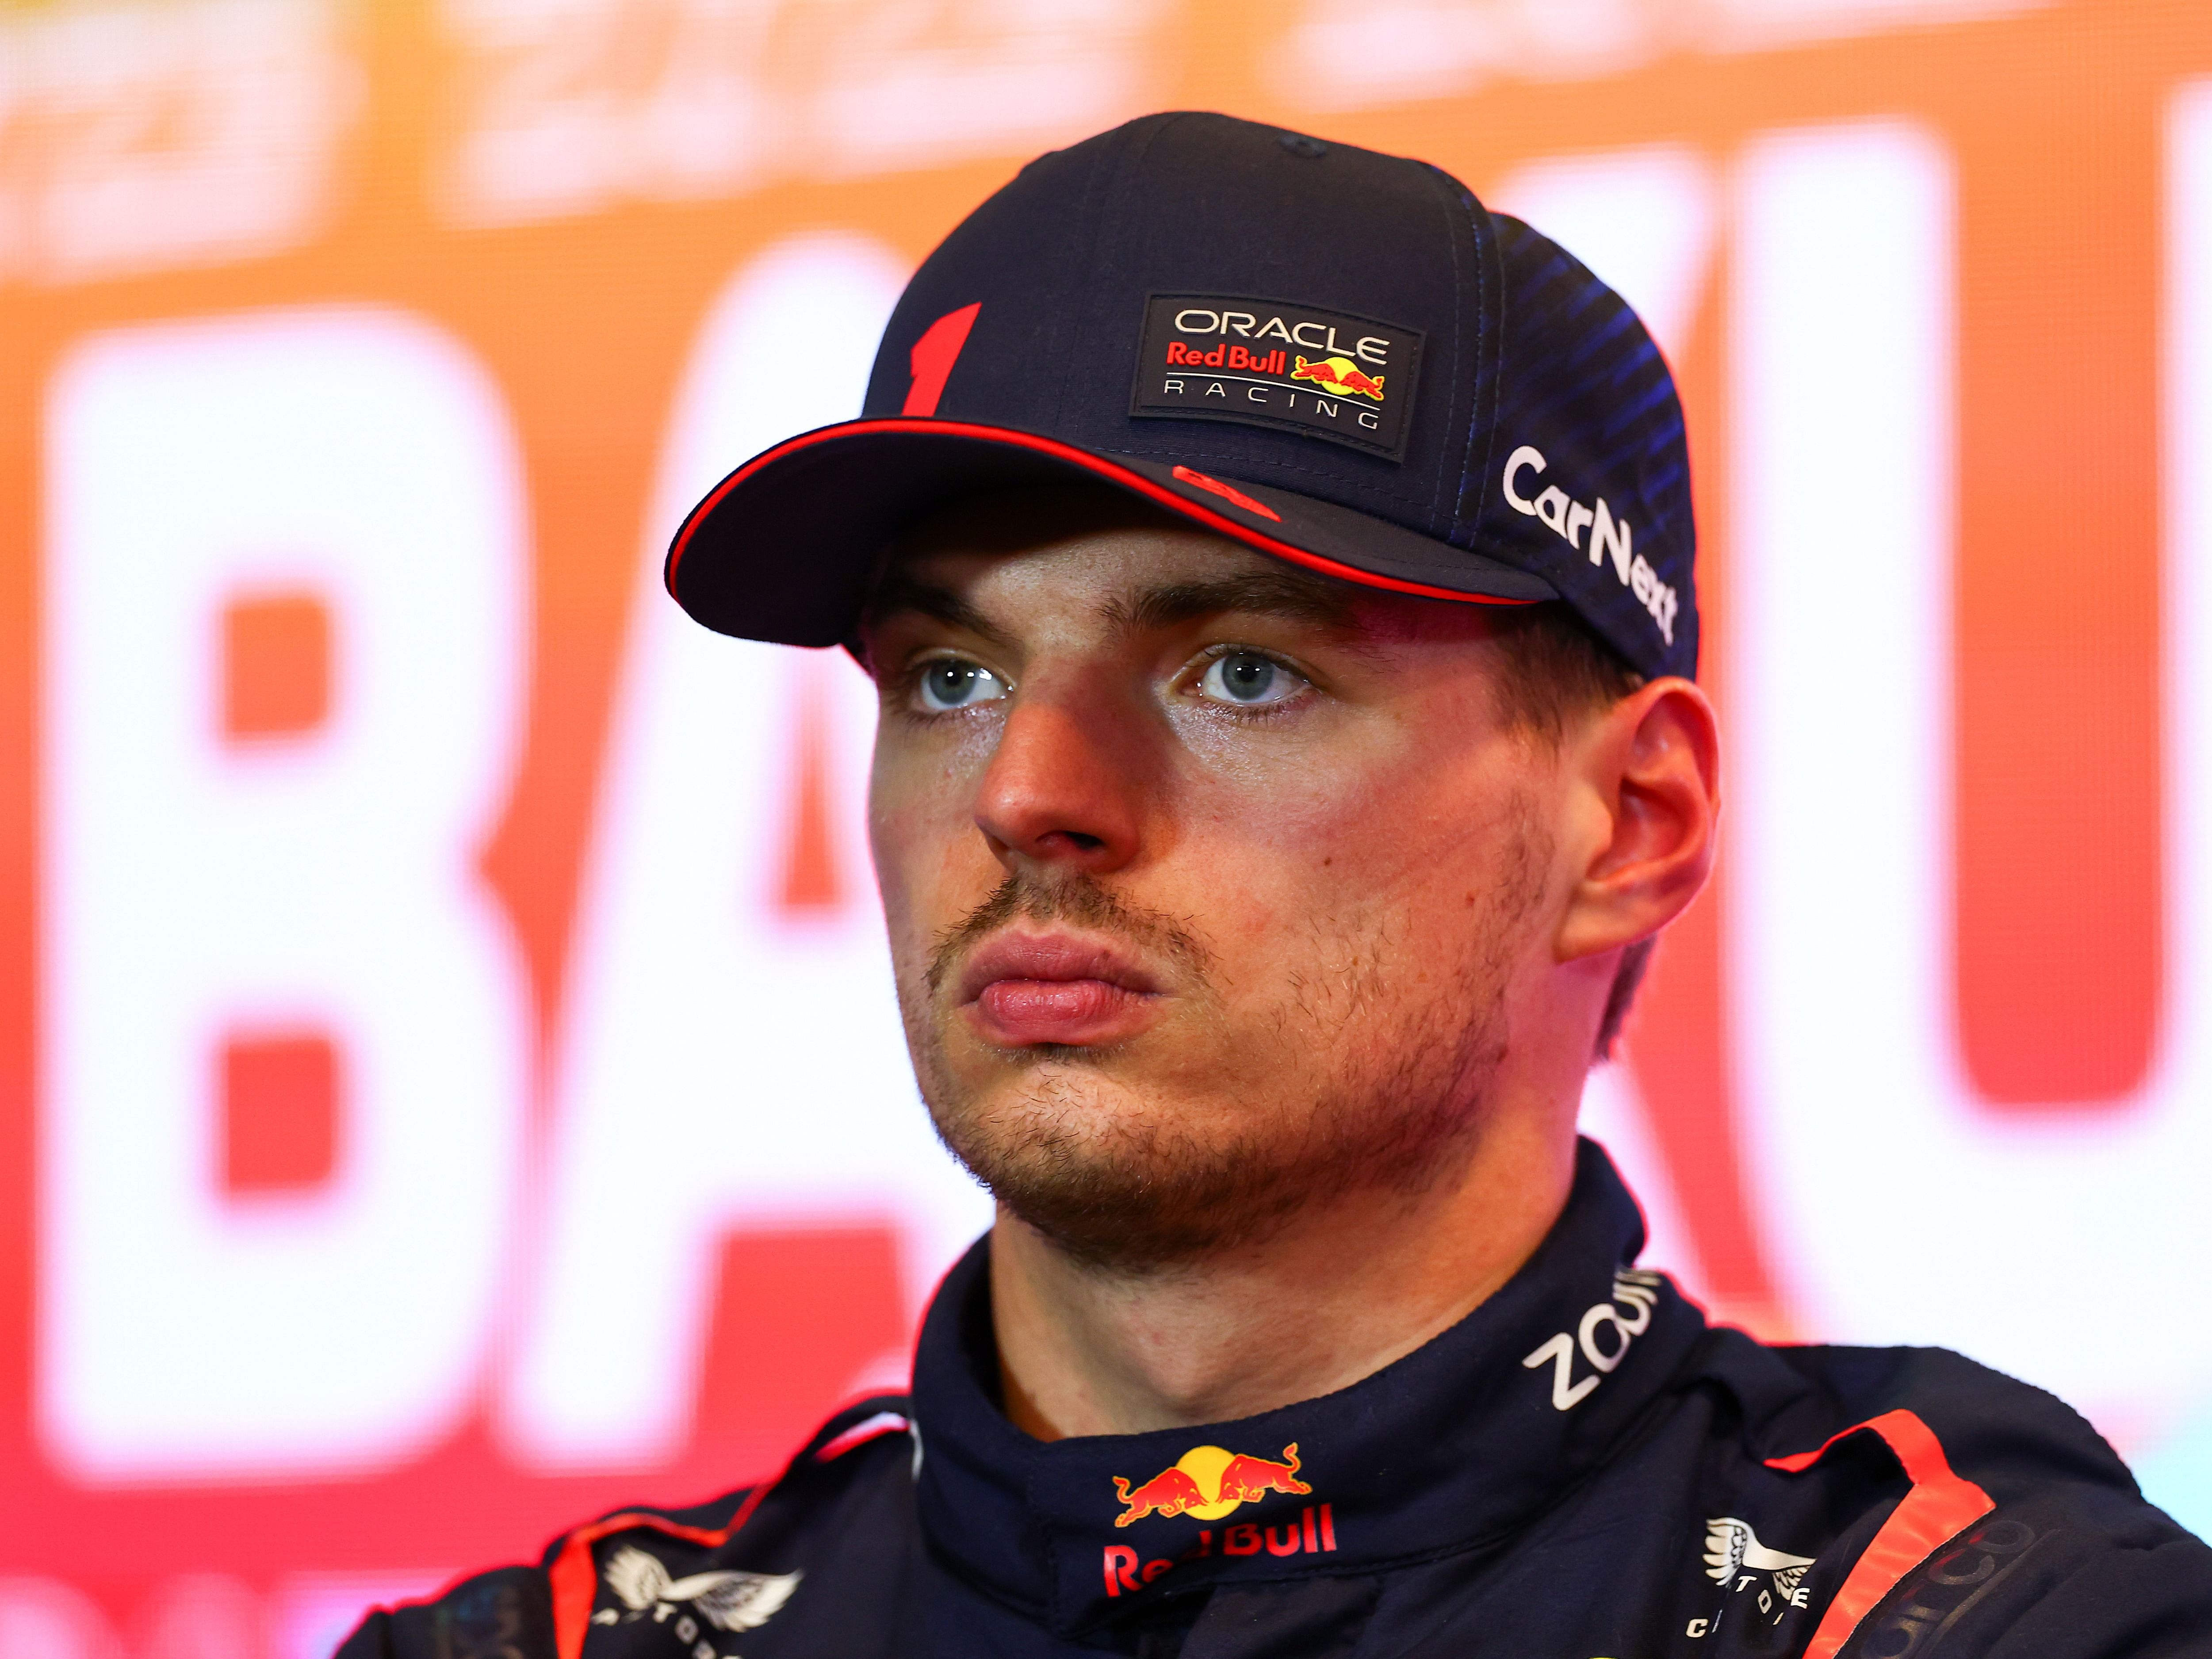 Second placed qualifier Max Verstappen attends the press conference after qualifying ahead of the 2023 F1 Azerbaijan Grand Prix. (Photo by Bryn Lennon/Getty Images)